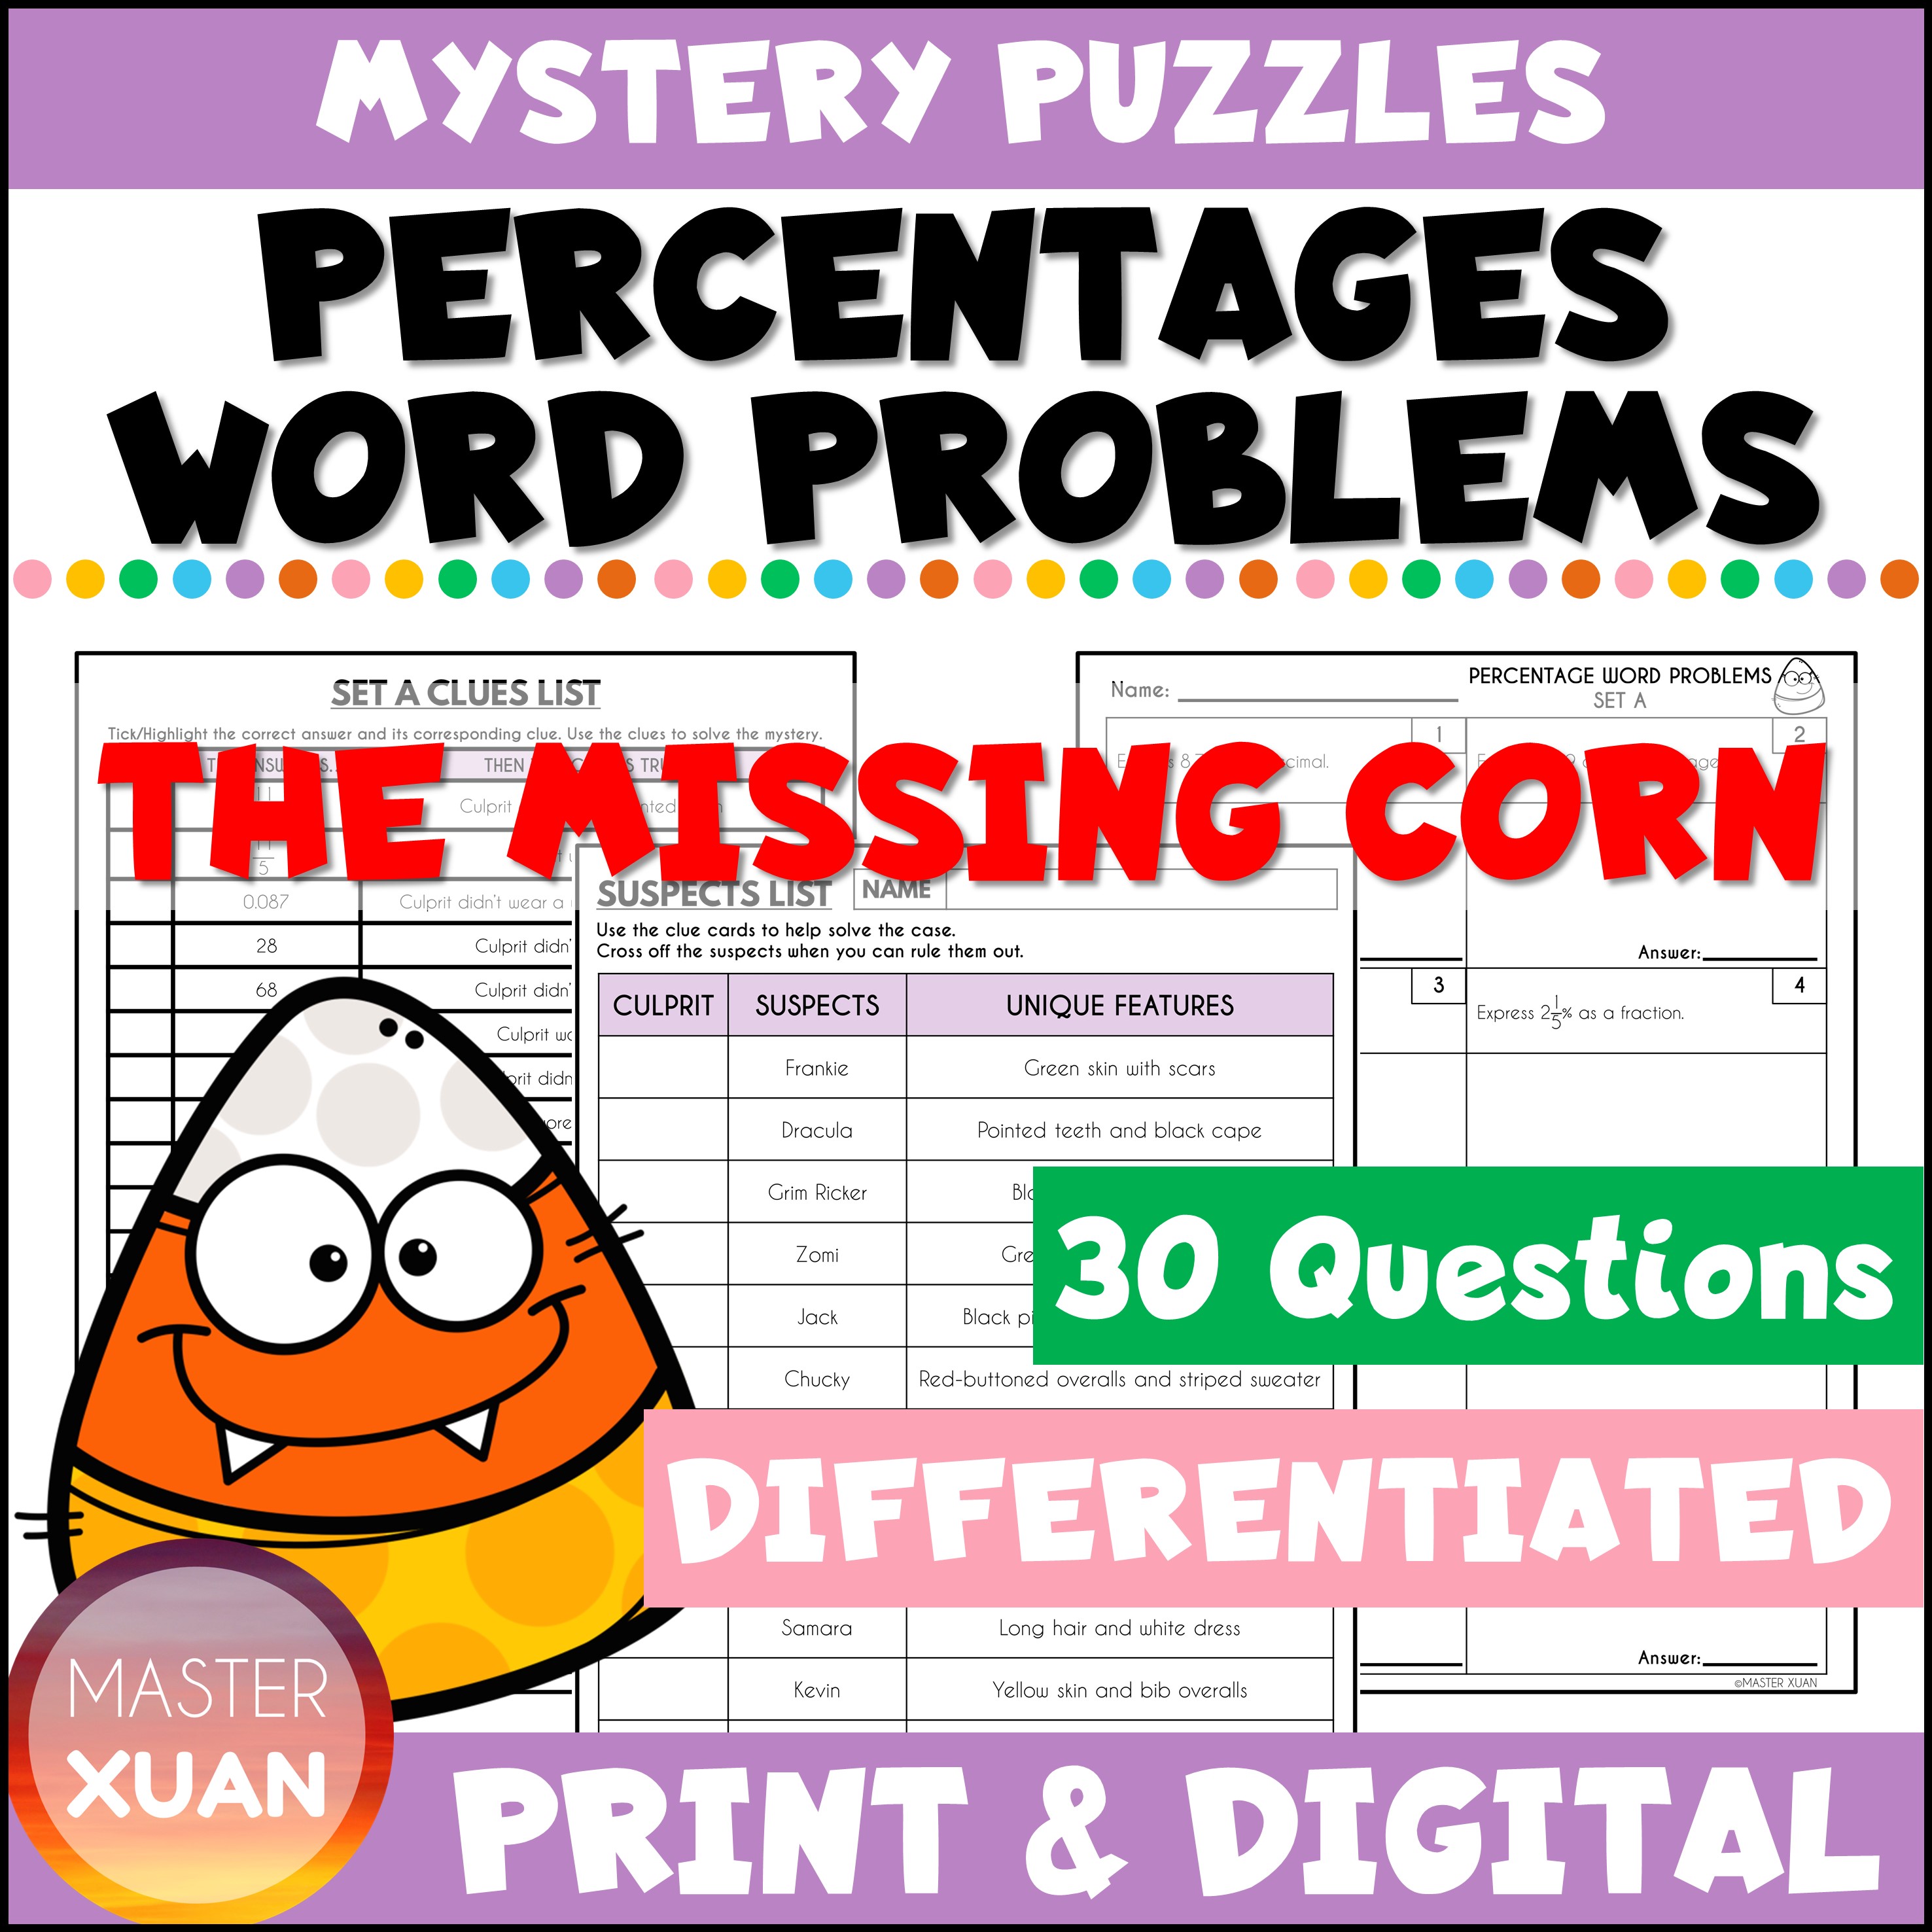 percentages word problems worksheets can be fun with math mystery puzzles.